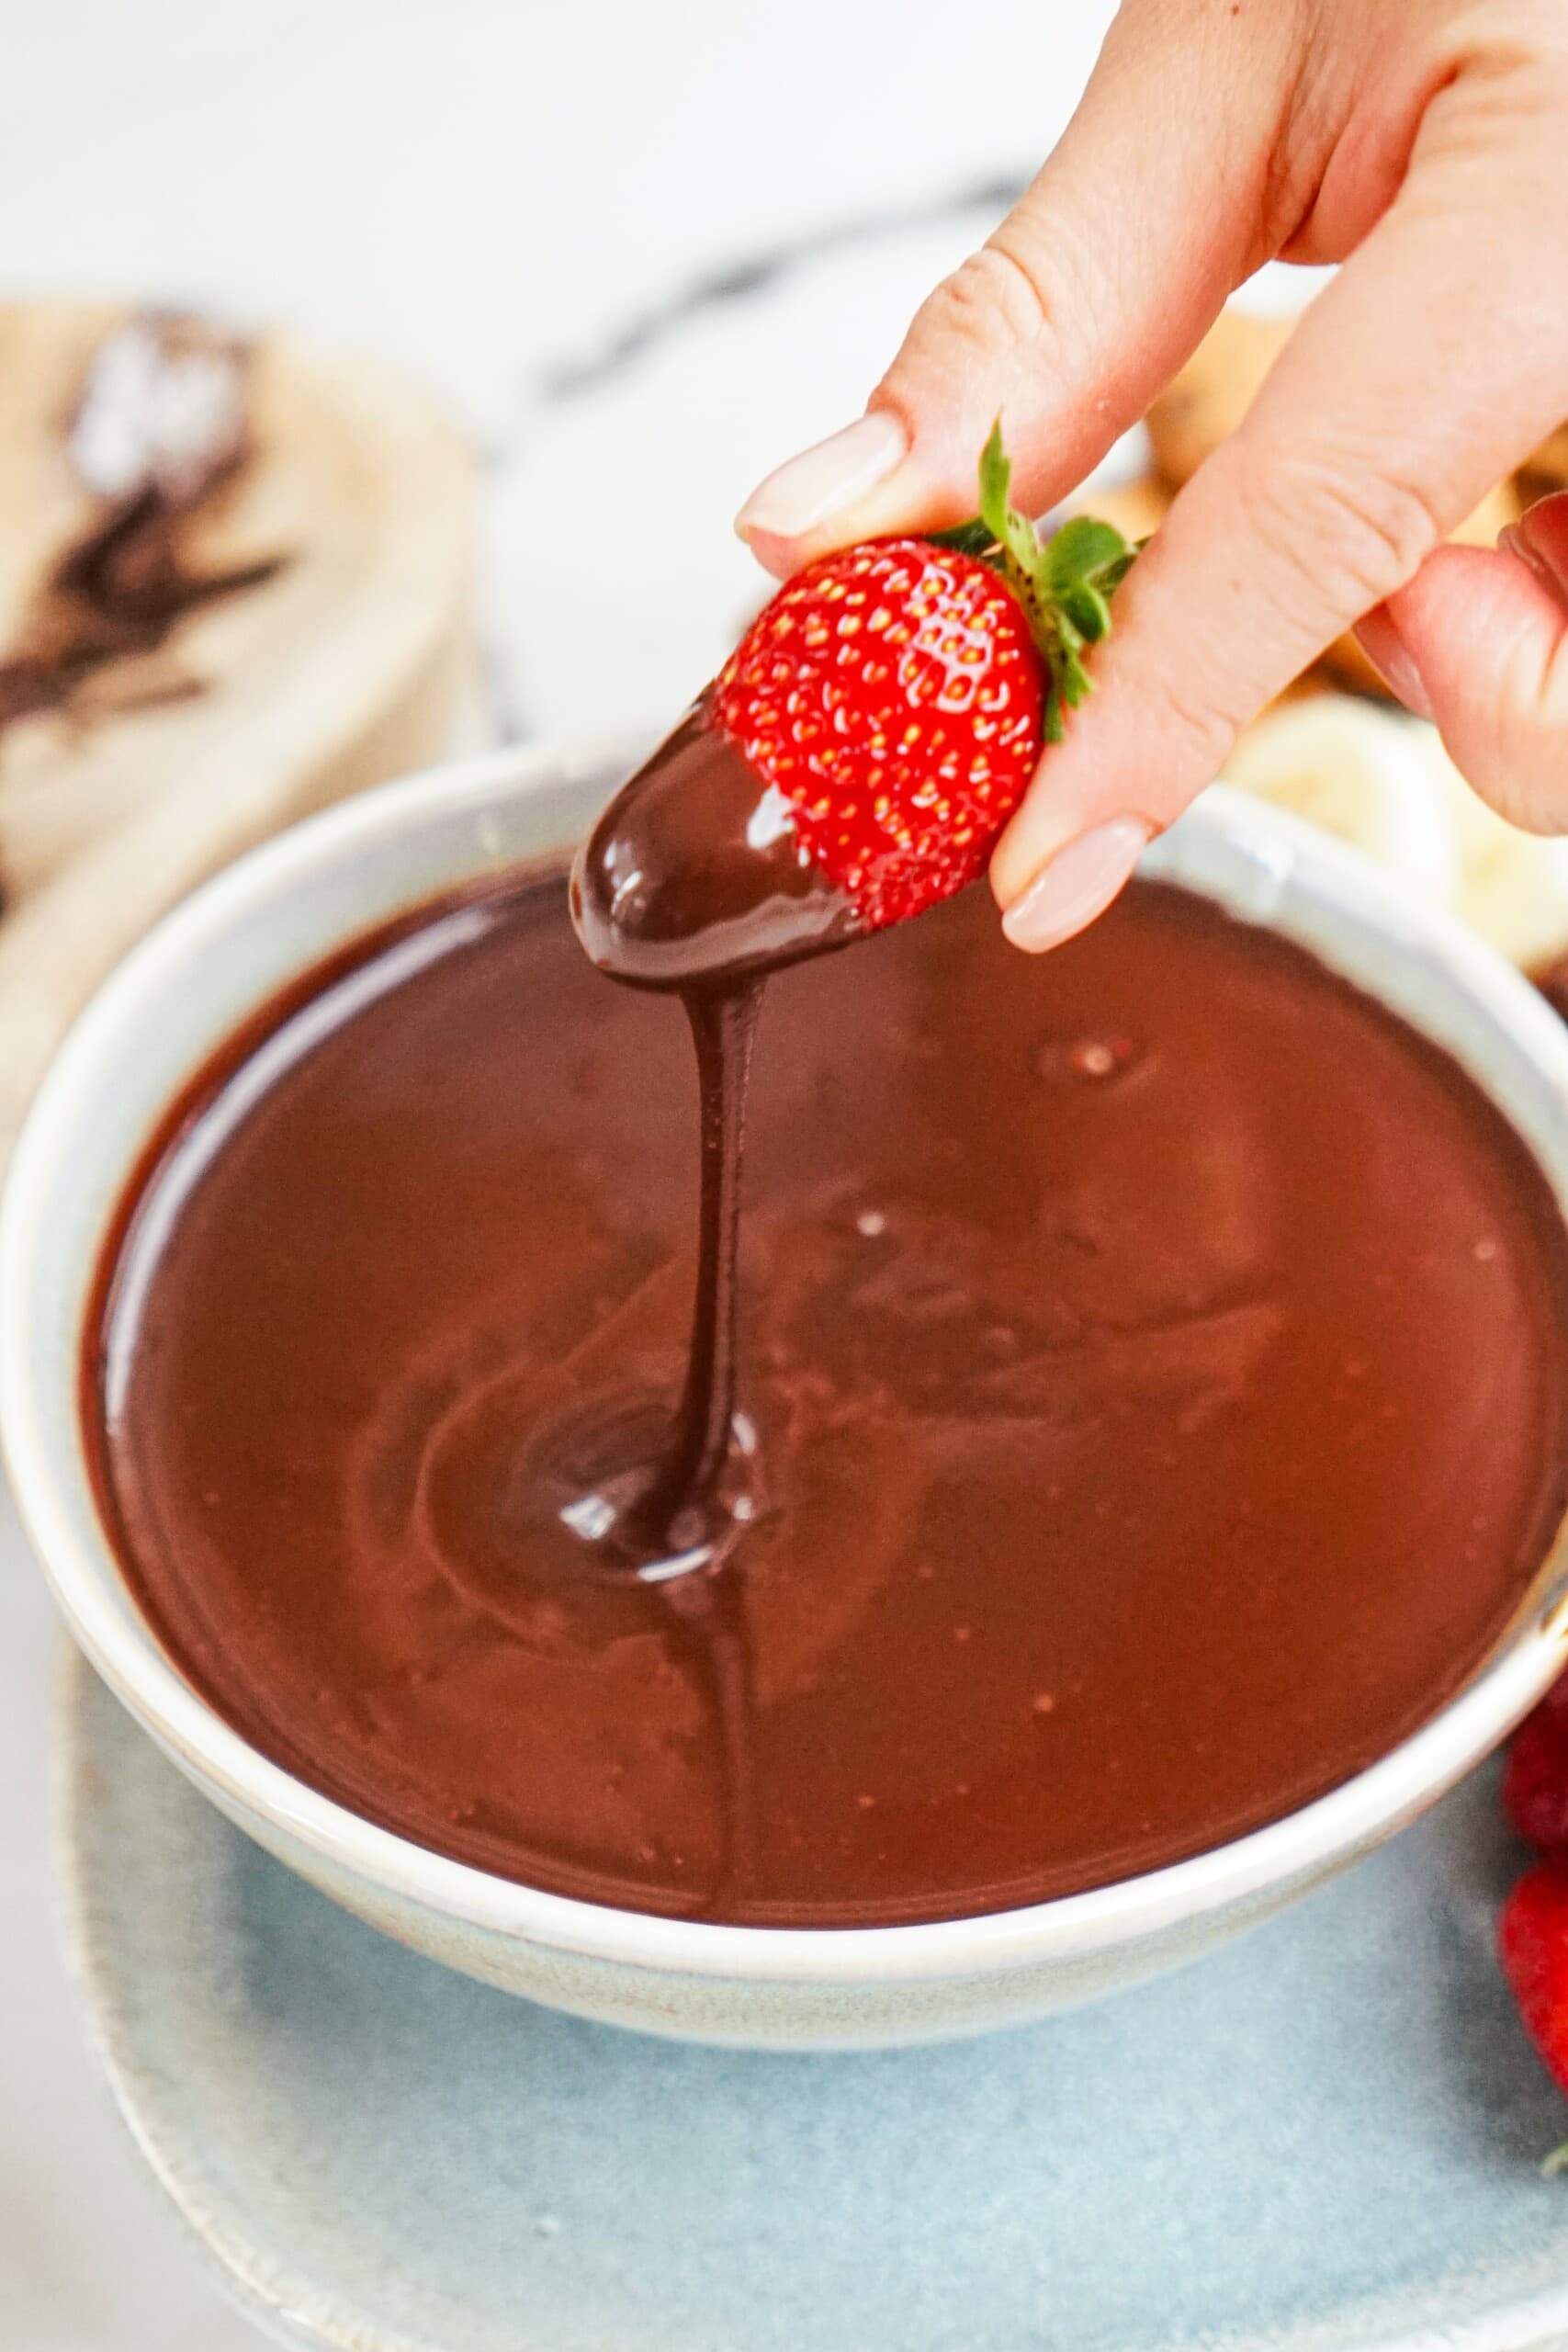 woman's hand dipping a strawberry into a bowl of chocolate.